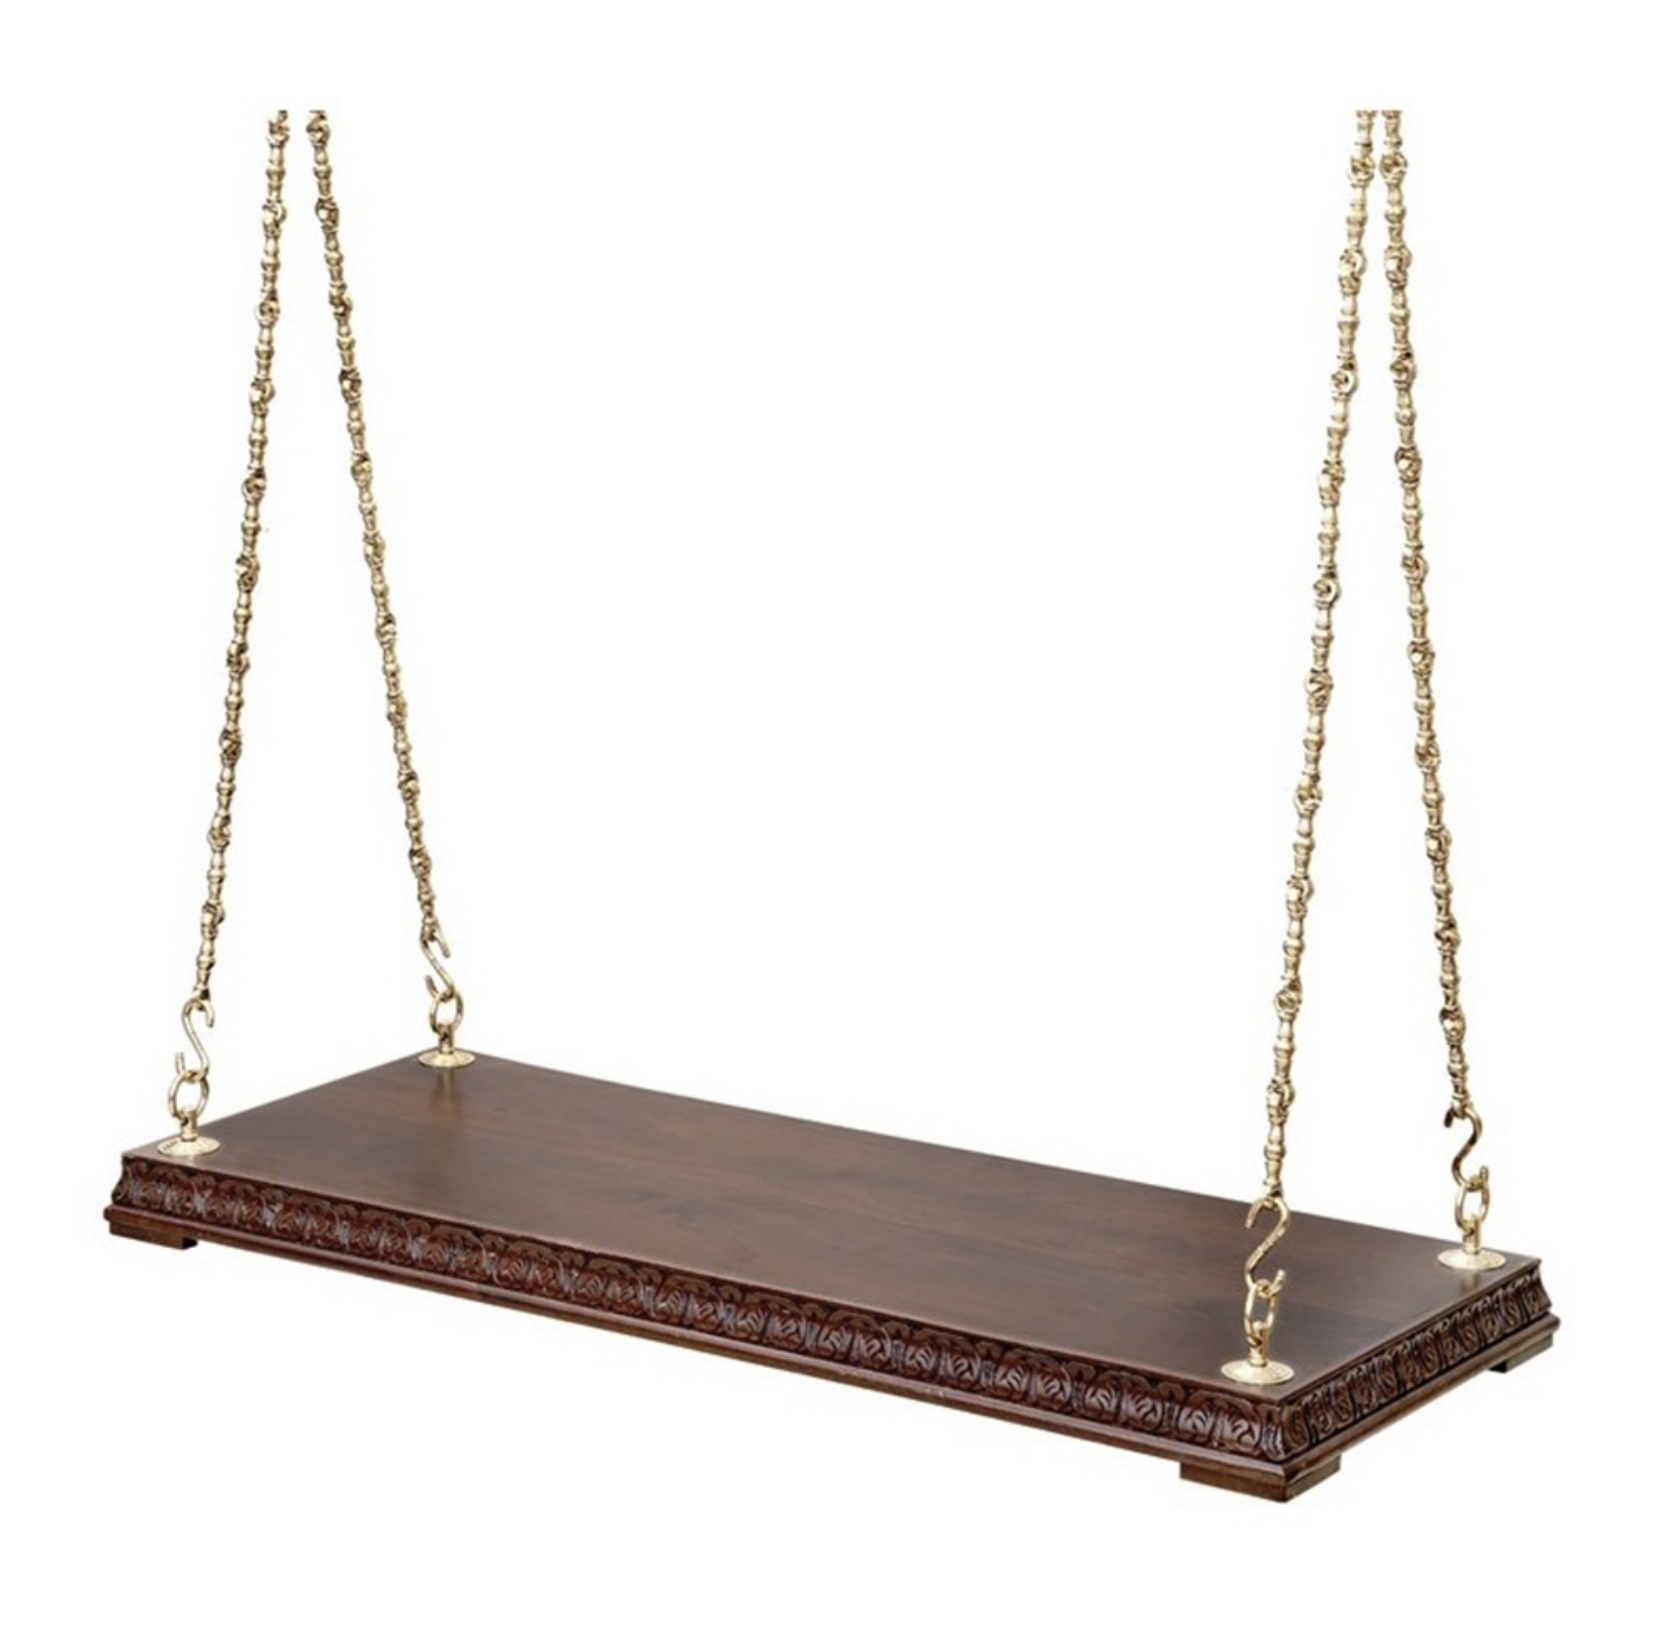 Antique Wooden Swing with Brass Chain